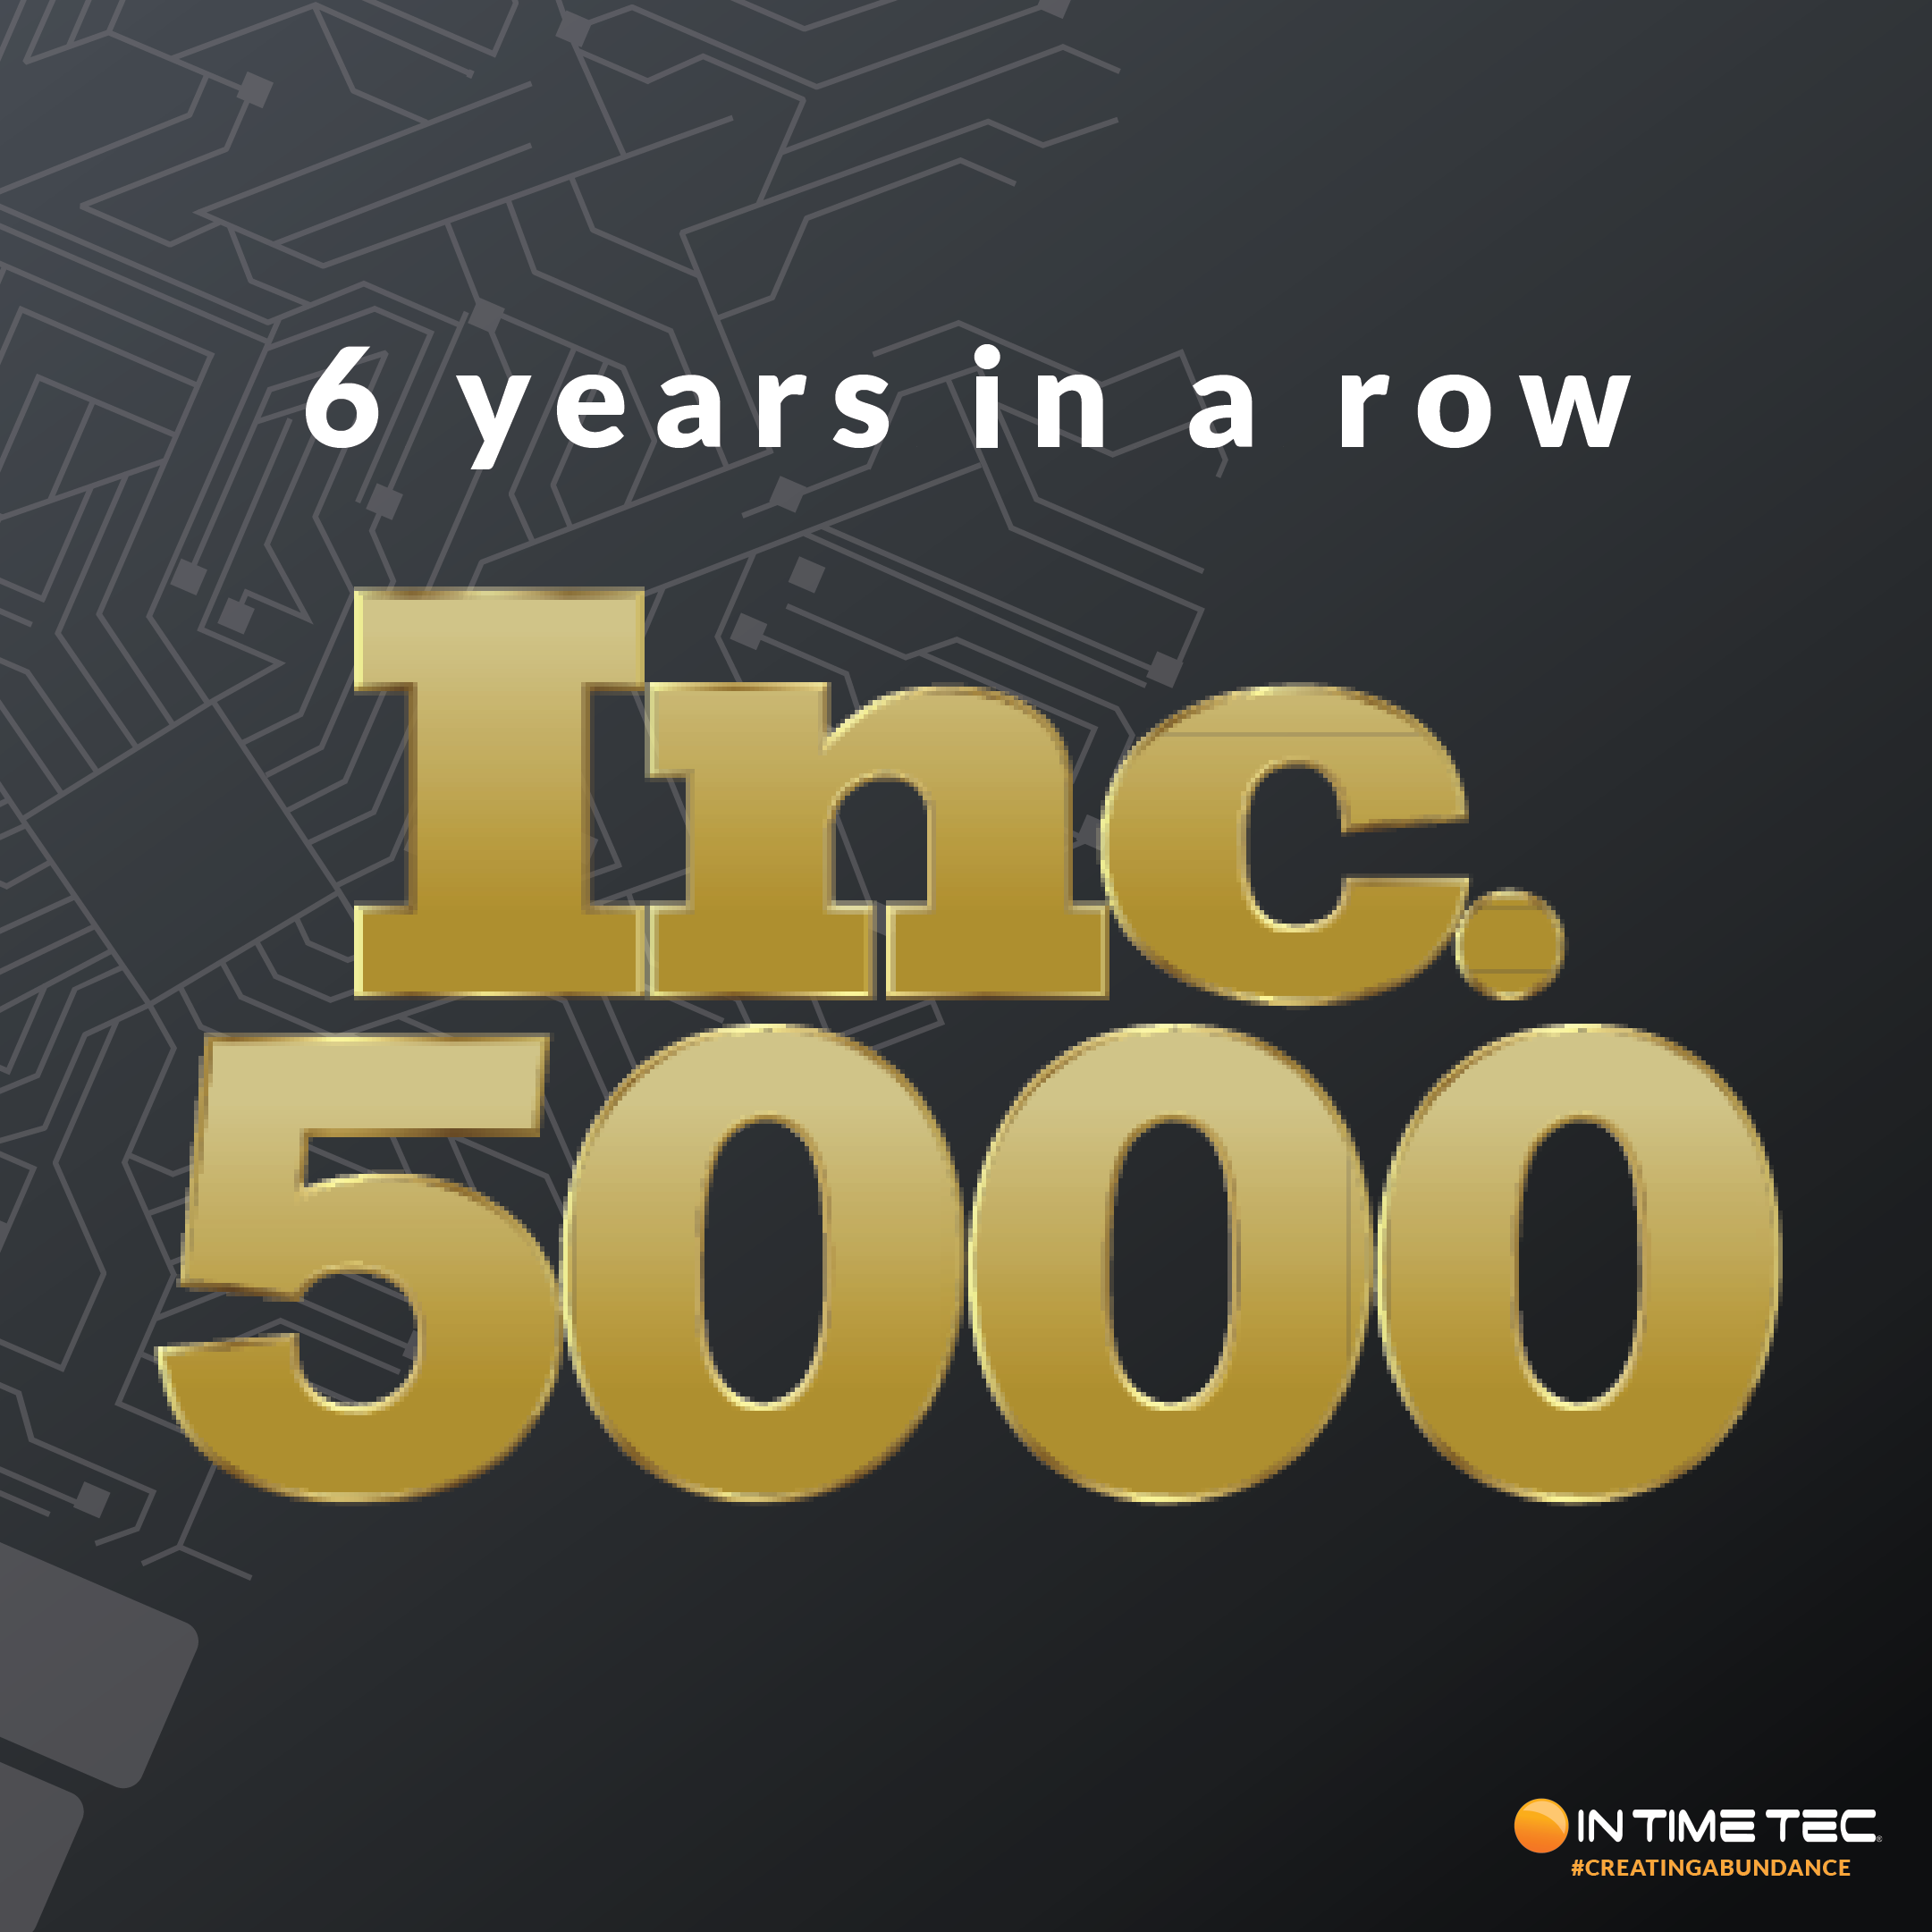 Press Release: Idaho-Based Technology Company Makes Inc. 5000 List of Fastest-Growing Private Companies for 6th Year in a Row